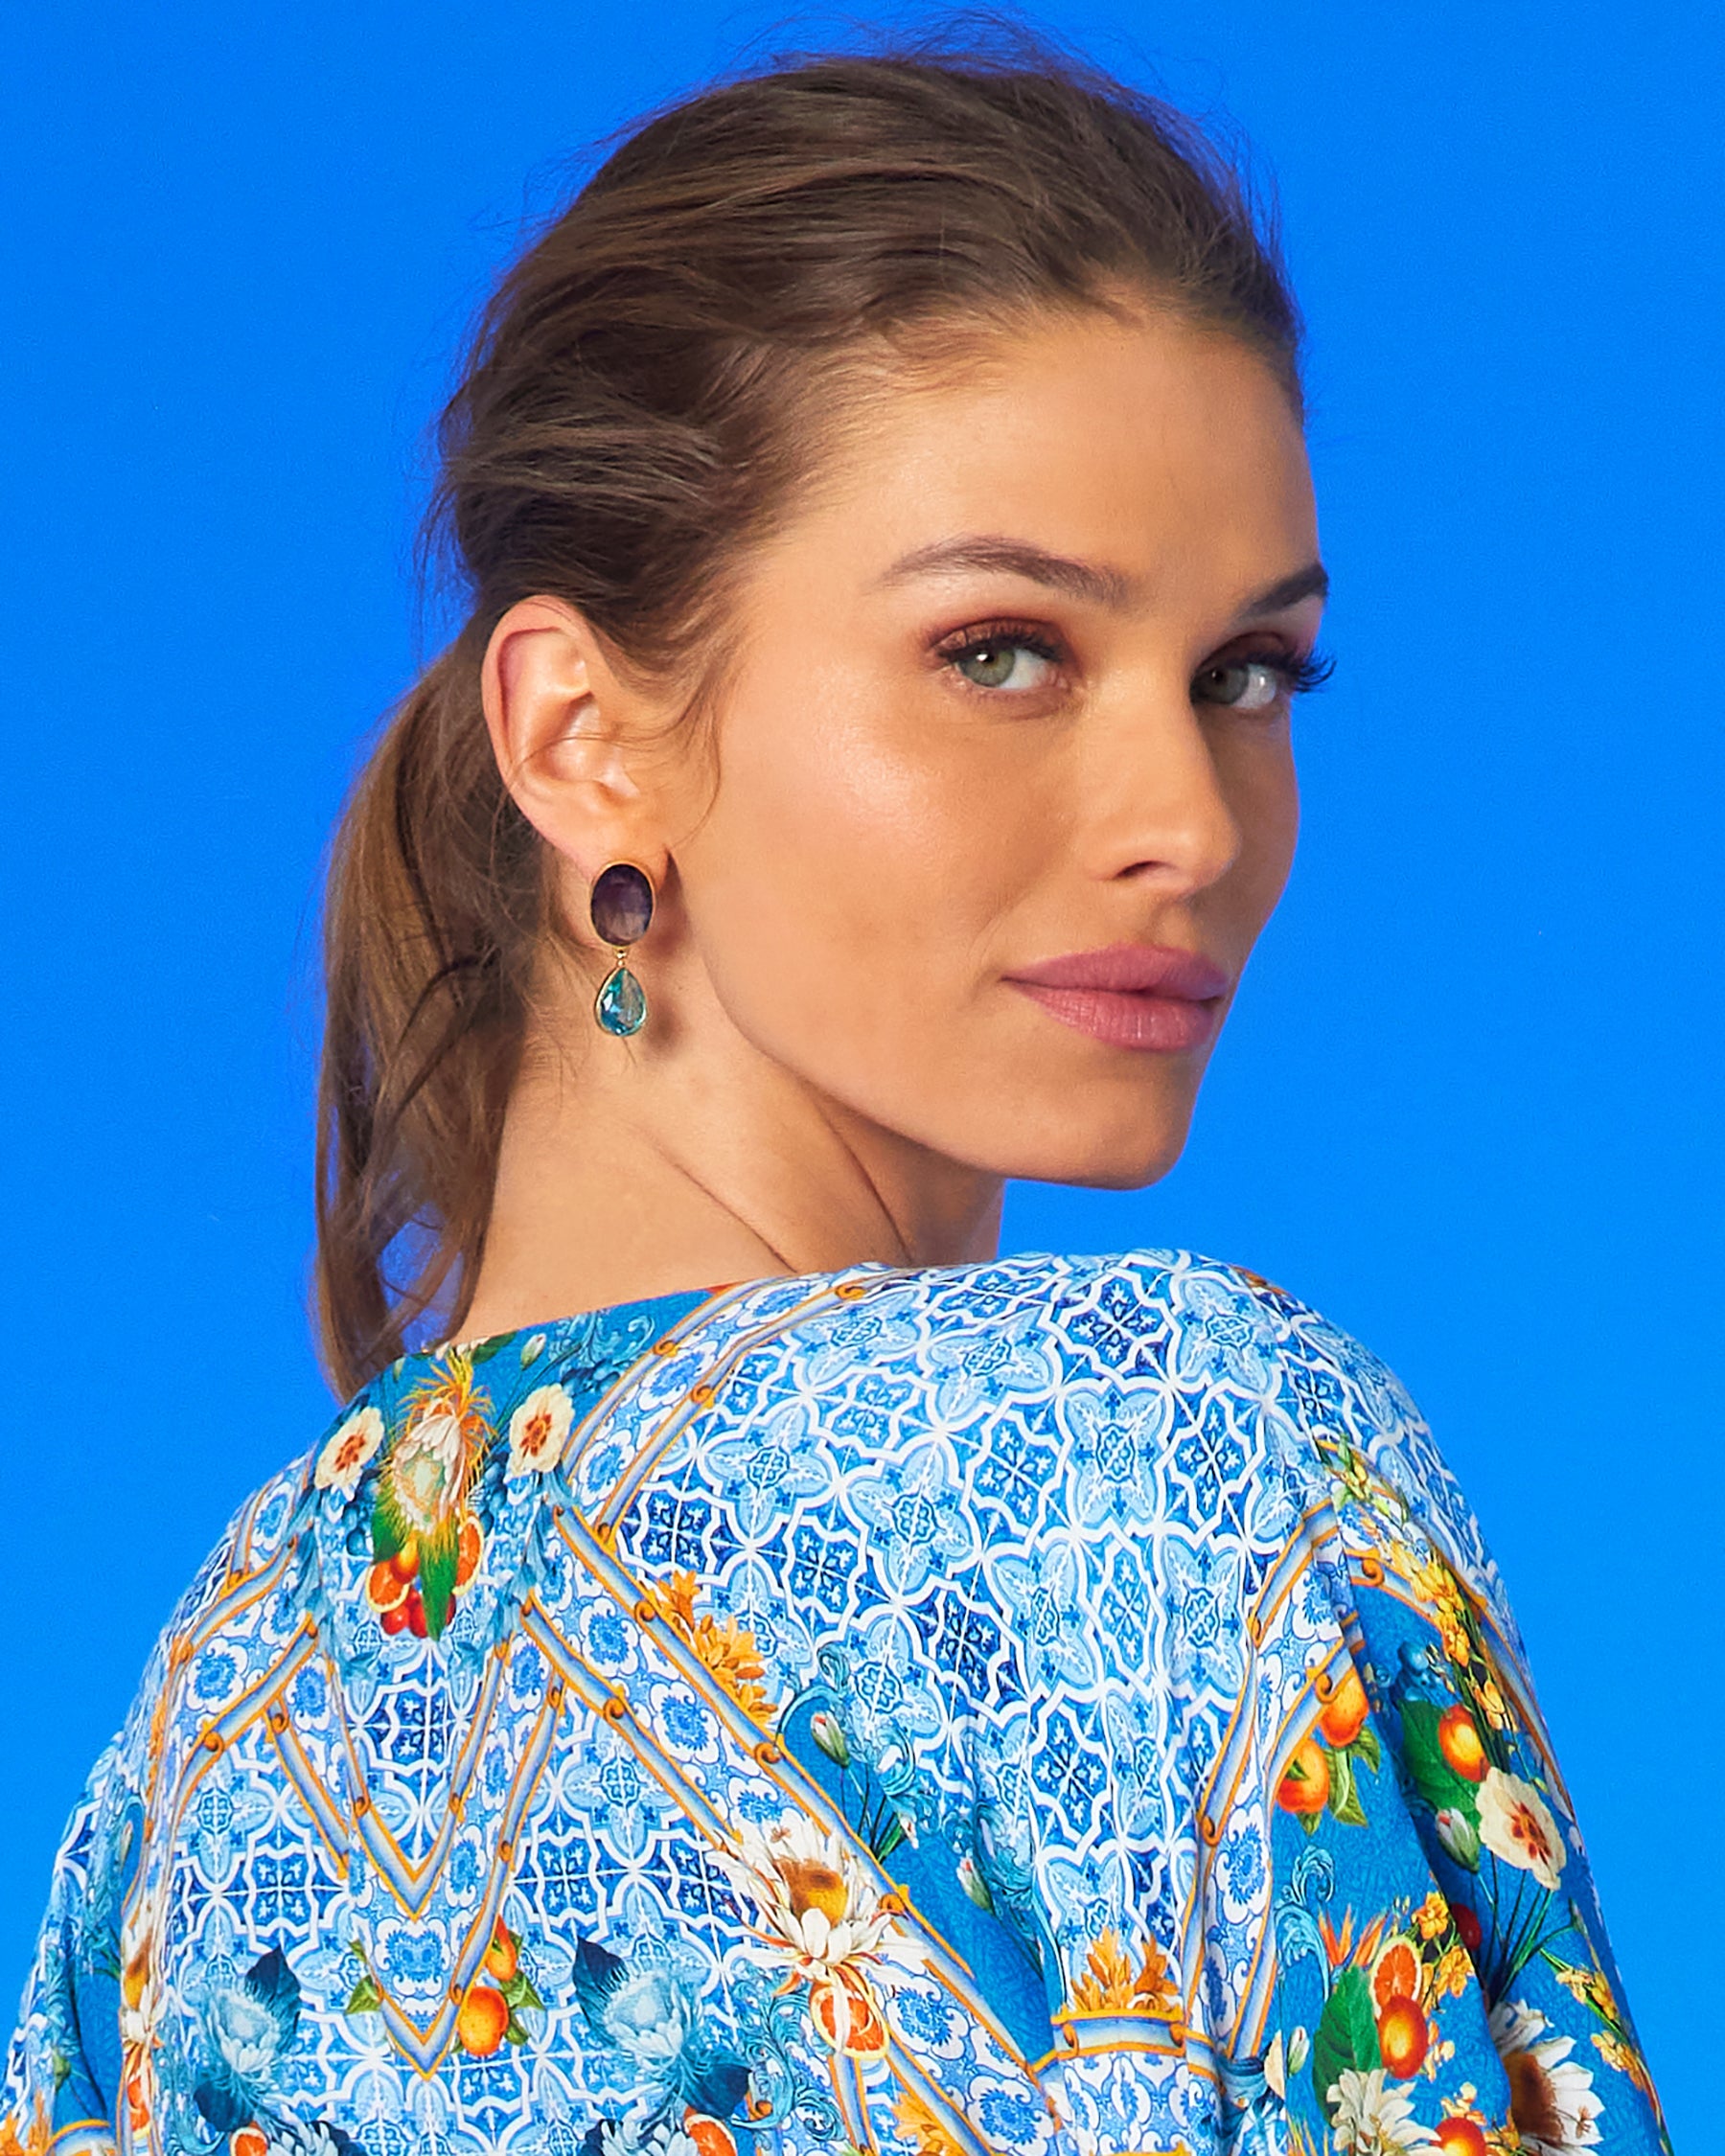 Fiorella Cinched Long Kaftan in Porcelain Print worn with the Chiara Dewdrop Earrings in Amethyst Purple and Crystal Blue